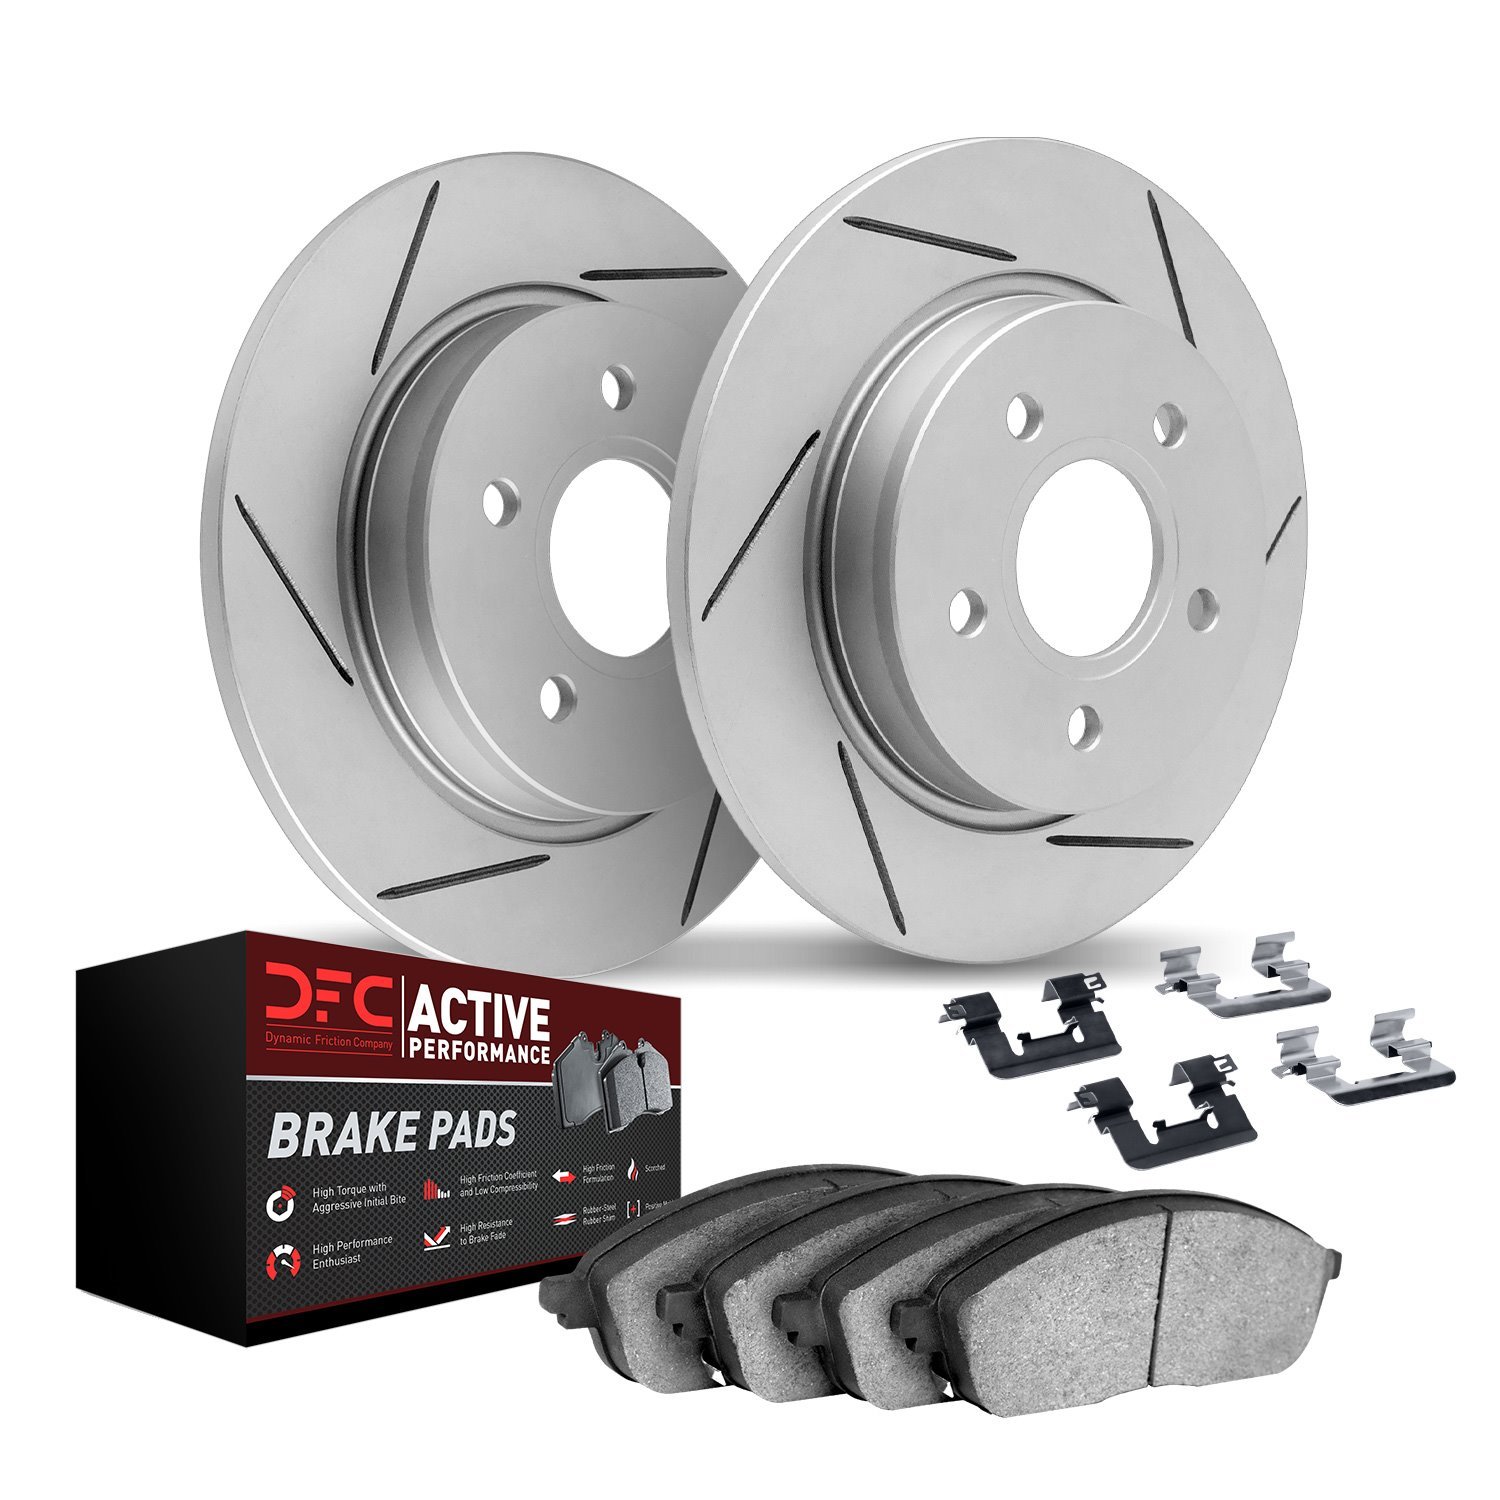 2712-59076 Geoperformance Slotted Brake Rotors with Active Performance Pads Kits & Hardware, 2008-2017 Acura/Honda, Position: Re